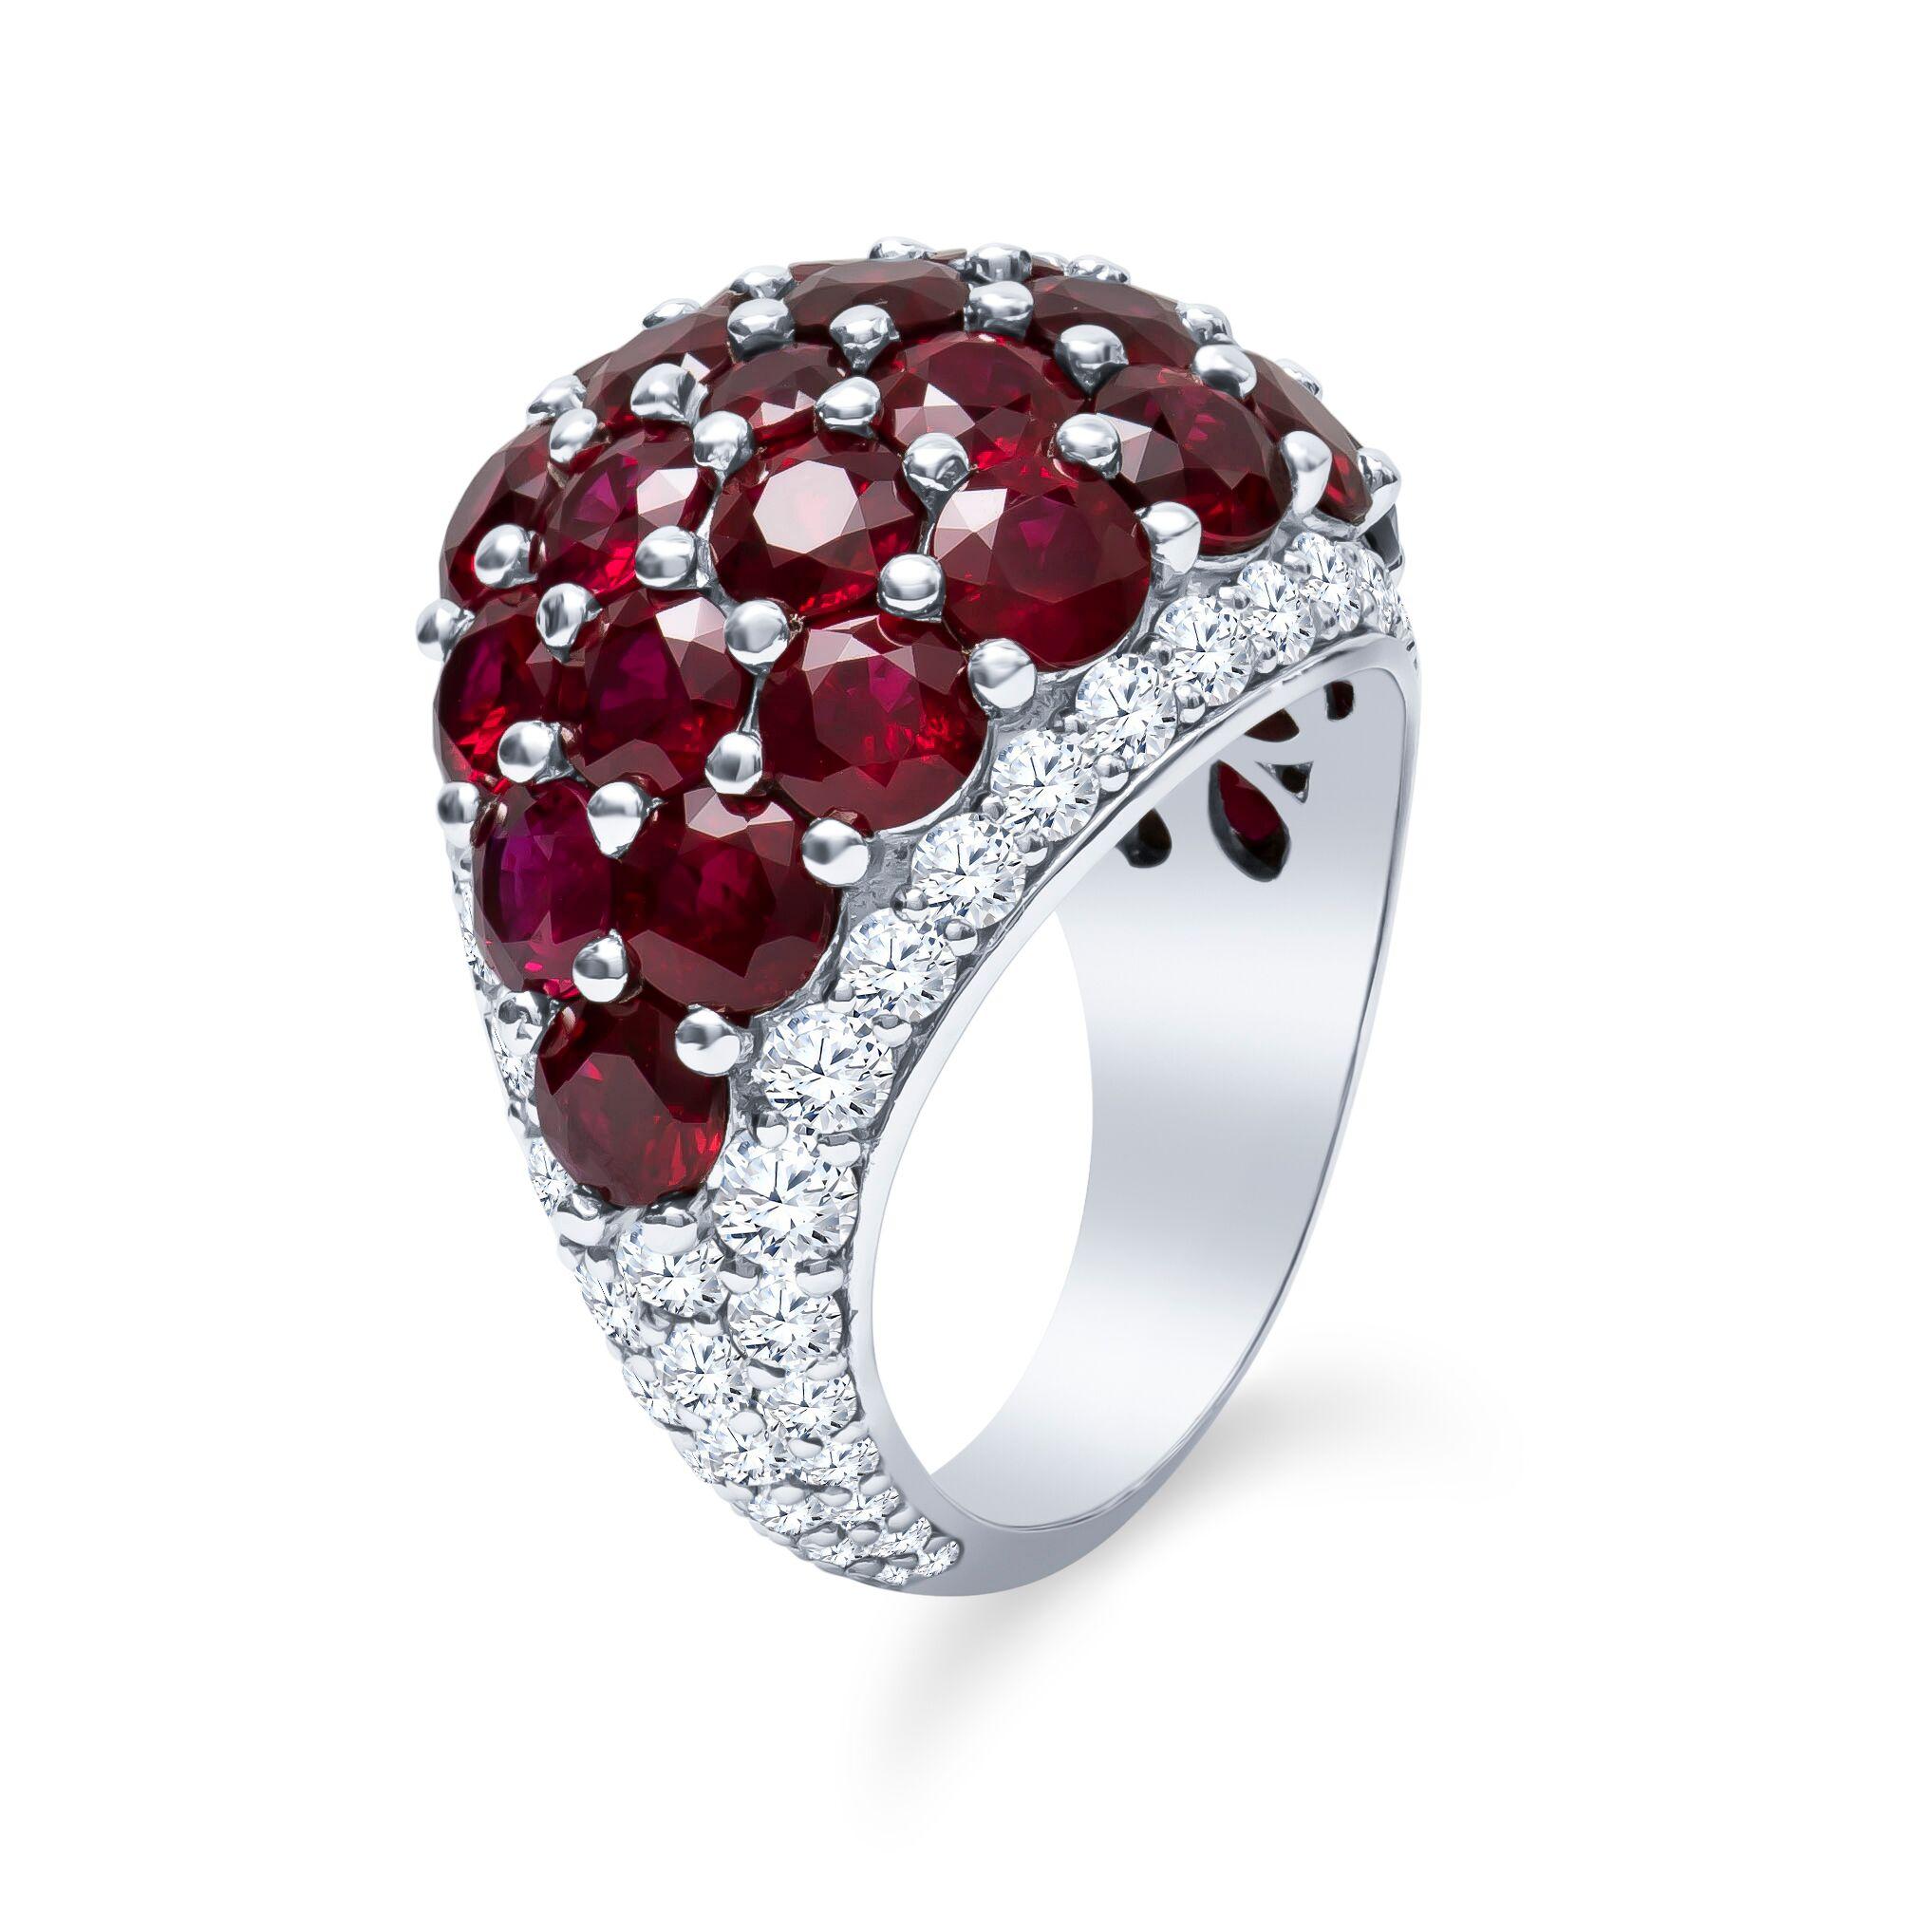 Custom Platinum 12.92 CTW Natural Ruby & Diamond Dome Ring 16.5 Grams Size 6.5

Twenty Seven Round Natural Red Rubies, Of About 4.3mm Each, 
Weighing Approximately 11.46 Carat Total Weight.

Sixty Eight Round Brilliant Cut Natural Diamonds,